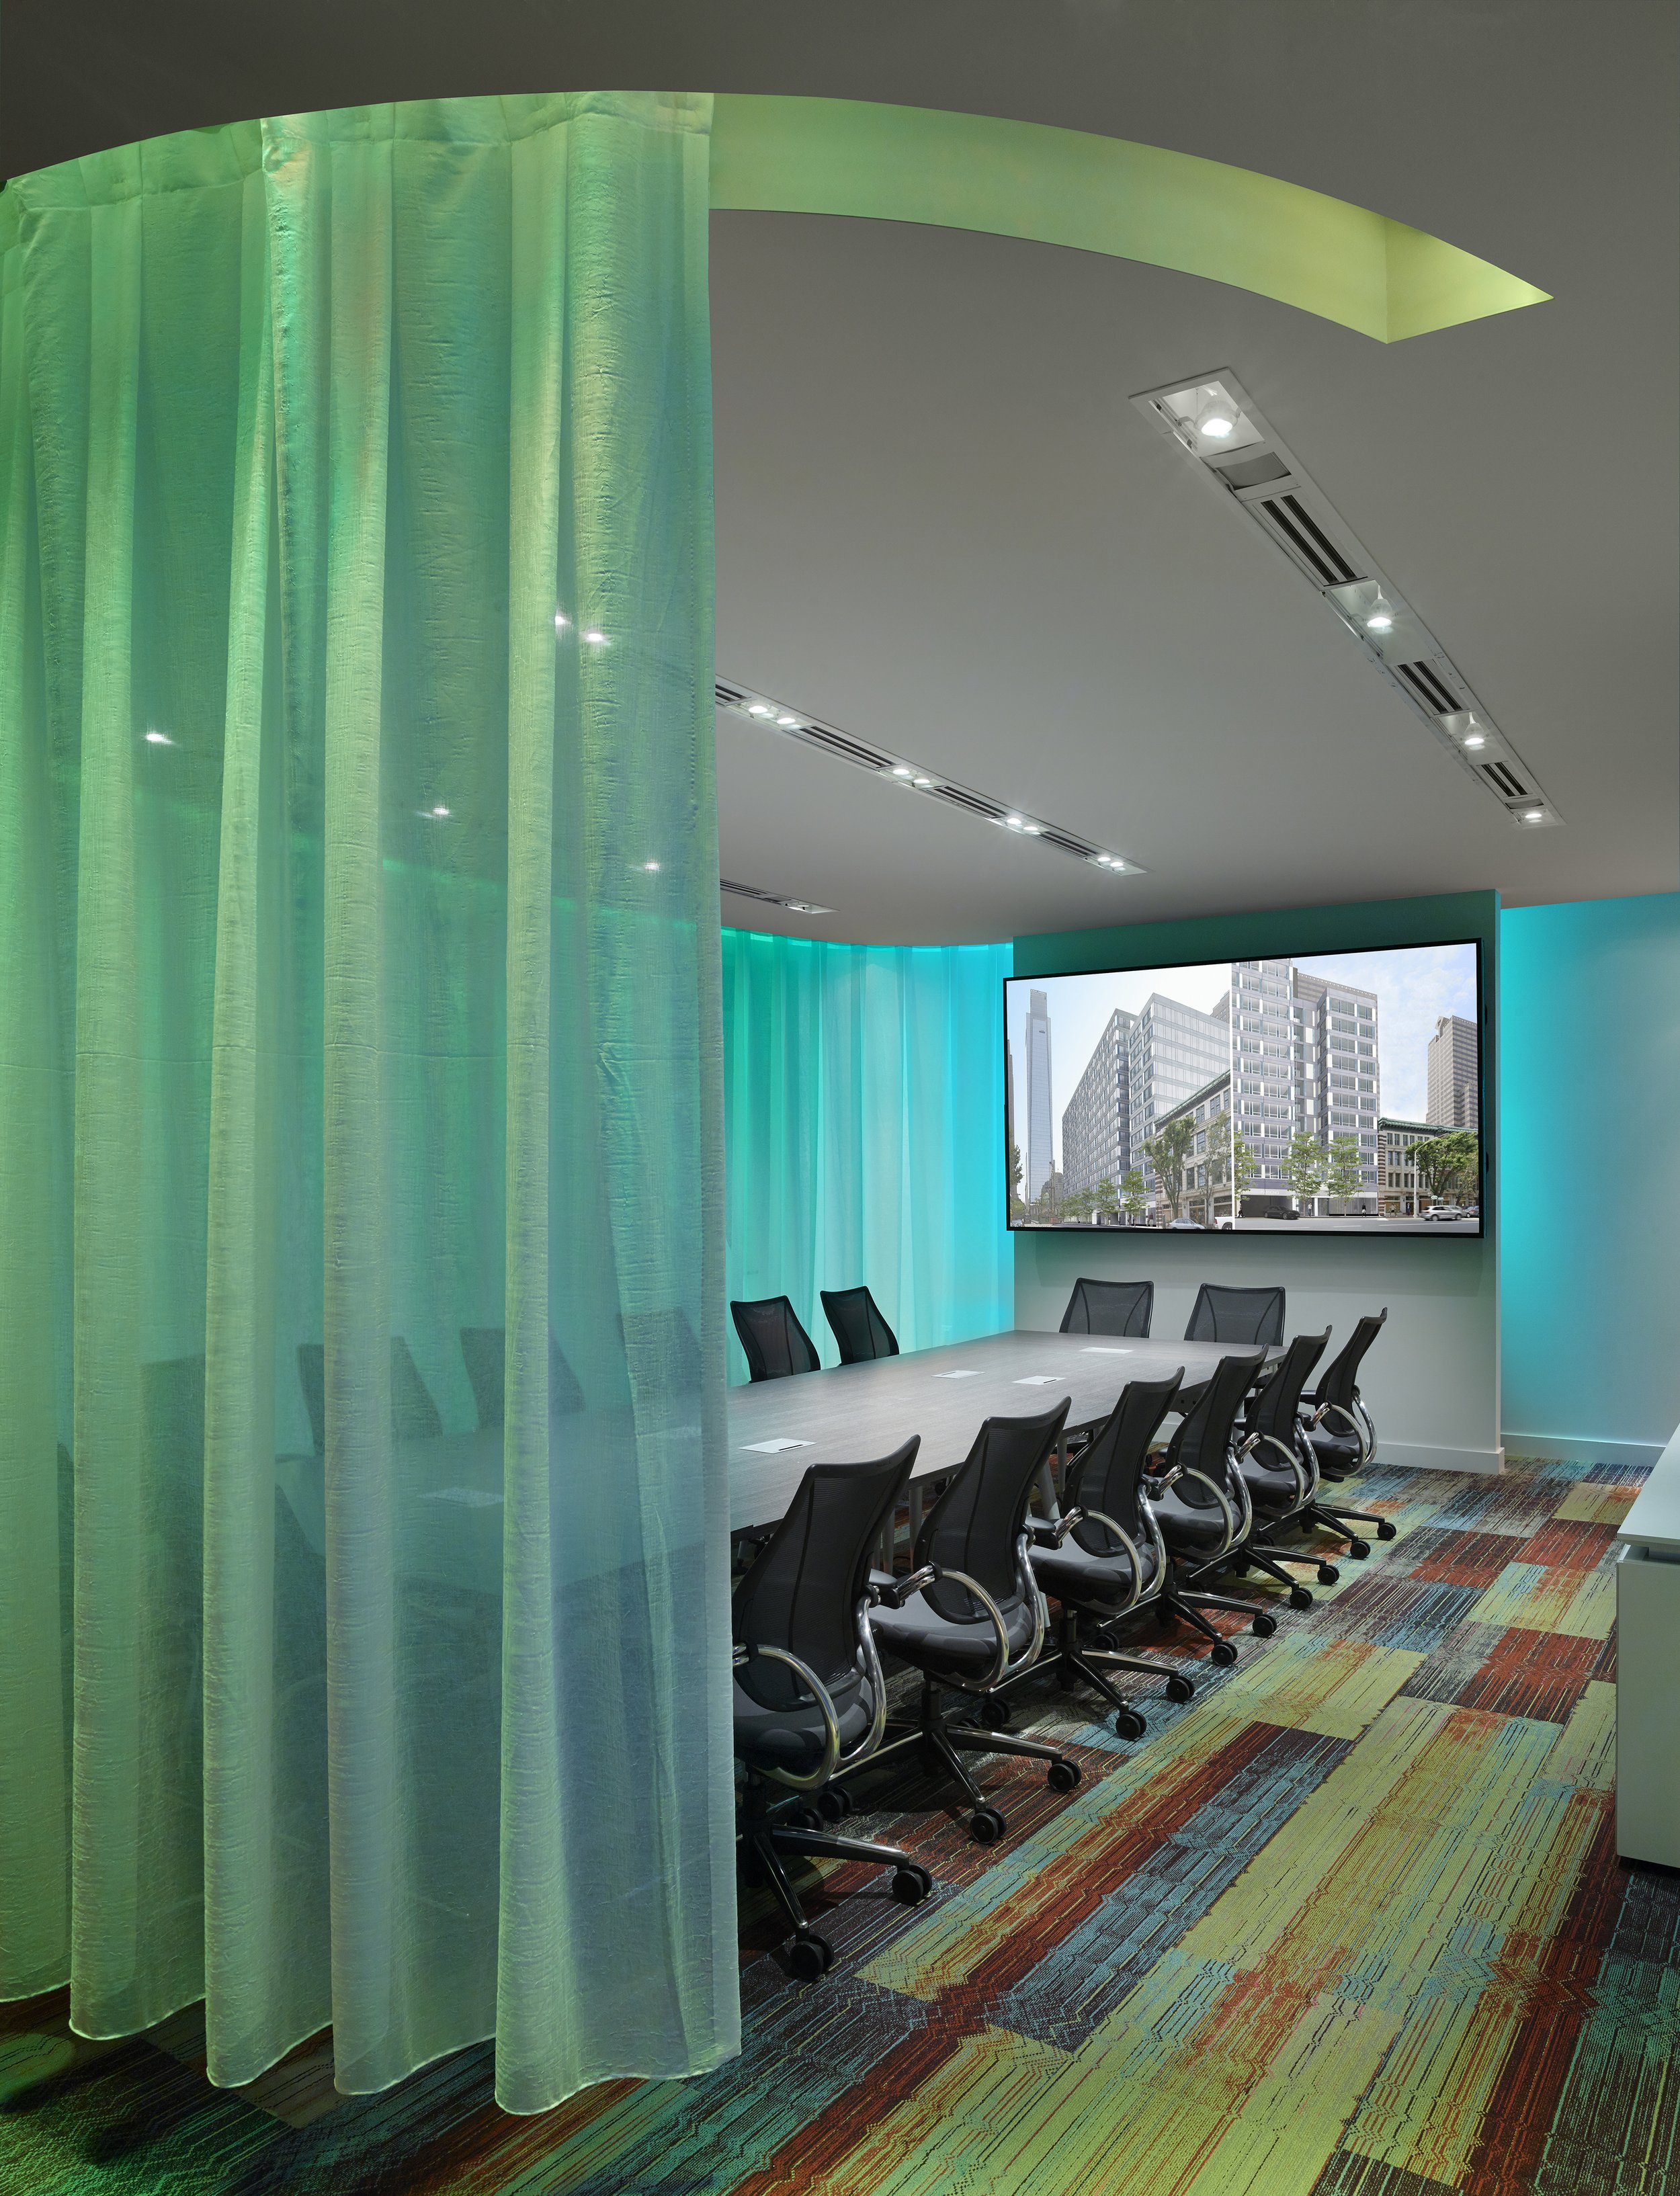 VIEW OF CONFERENCE ROOM